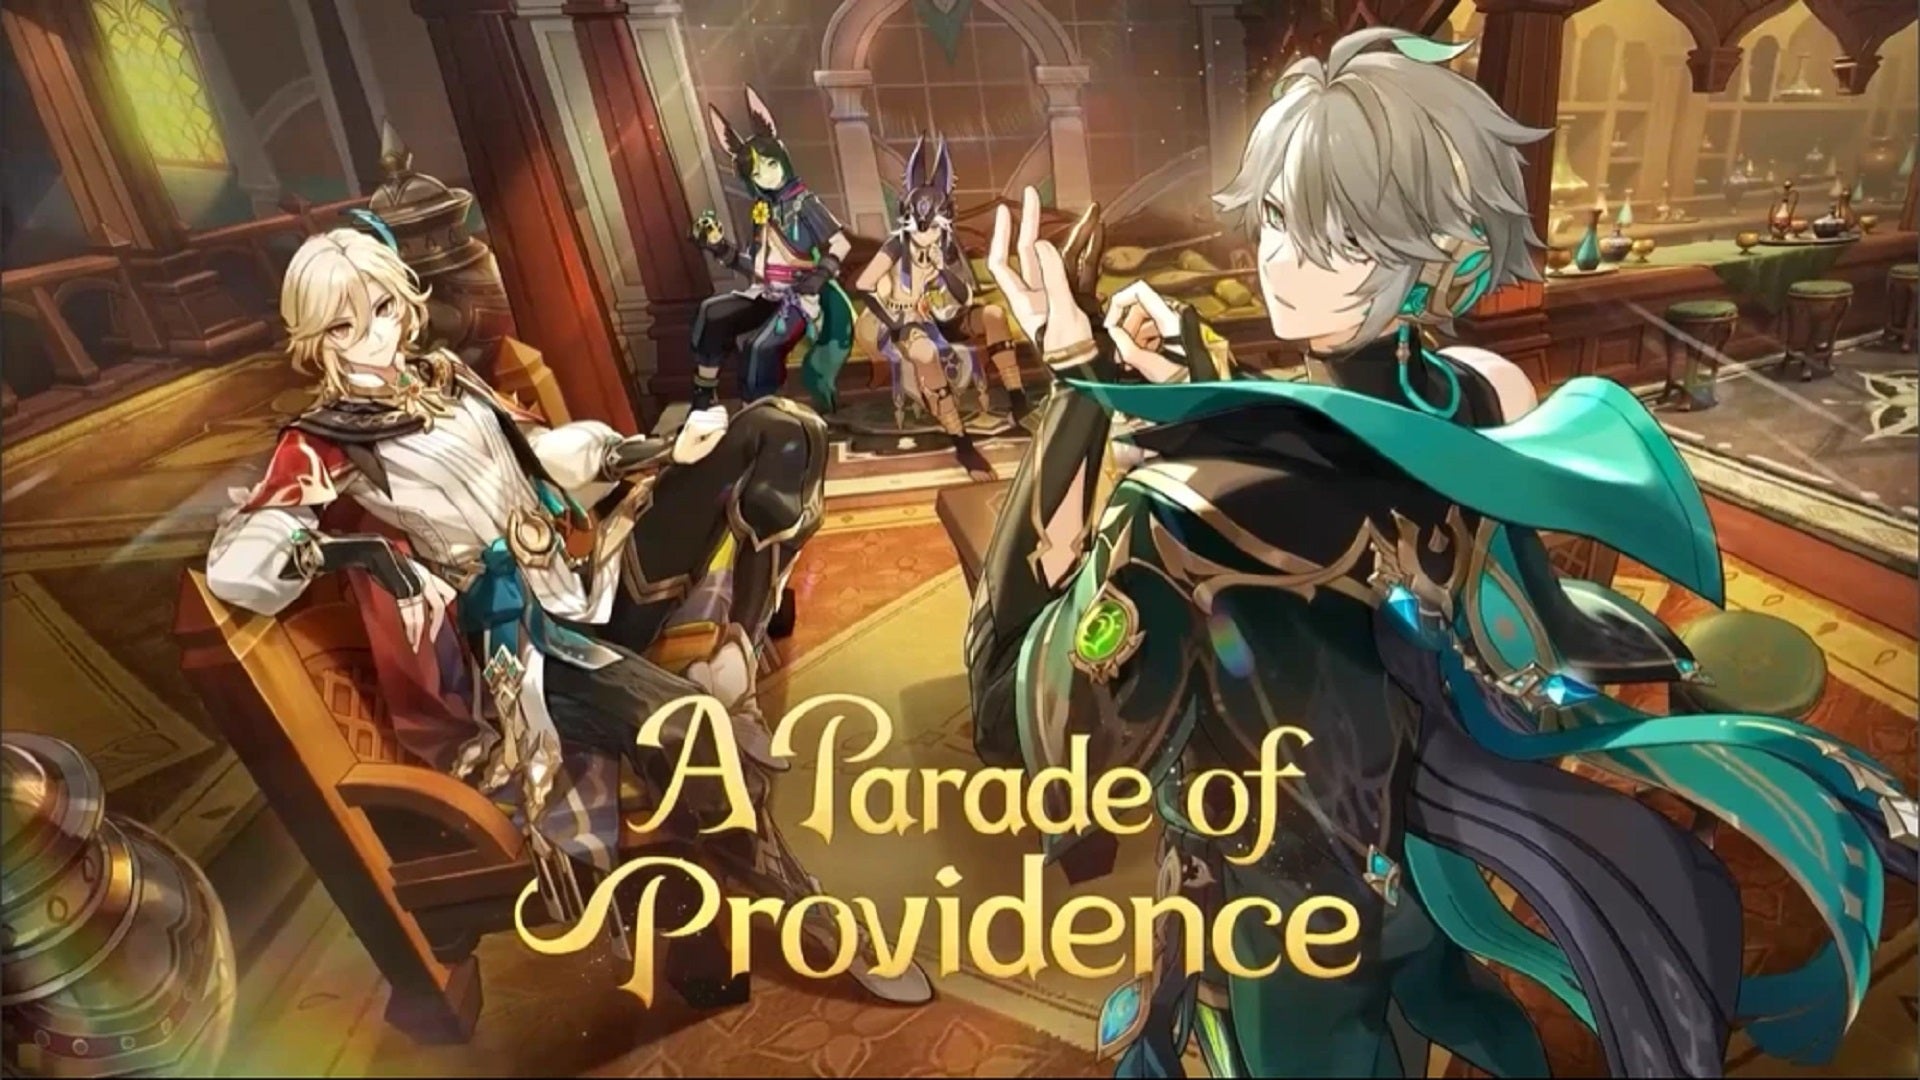 The key art for Genshin Impact Version 3.6 "A Parade of Providence". The picture shows Kaveh, Tighnari, Cyno, and Alhaitham relaxing in a spacious and well-appointed bar.